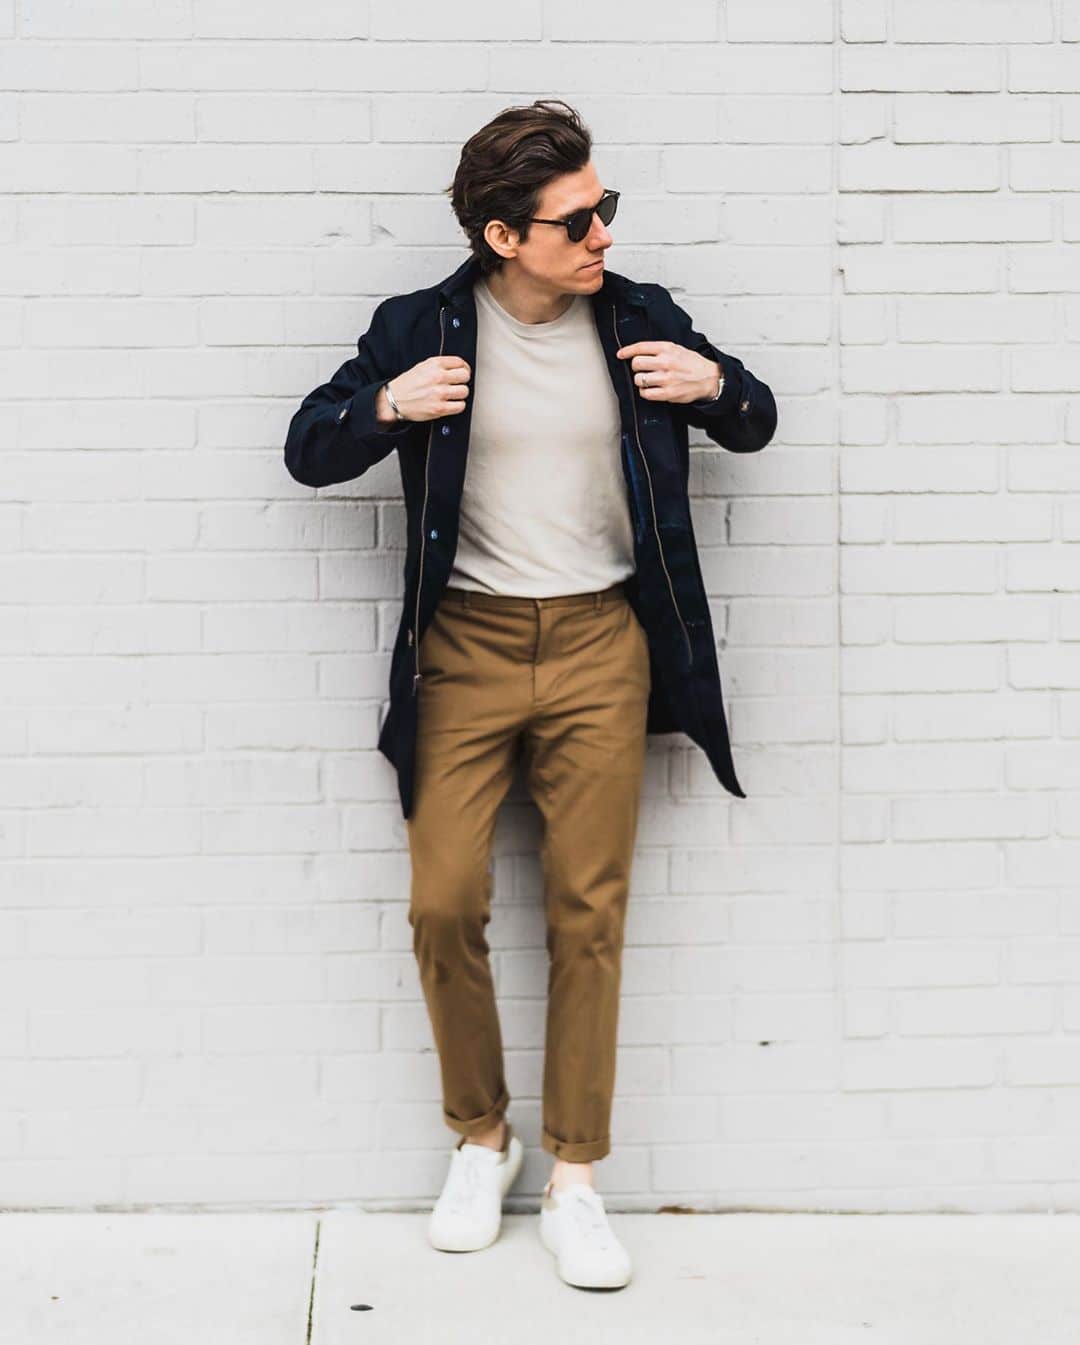 How to Wear a T-Shirt: 12 Outfit Ideas for Guys - The Modest Man